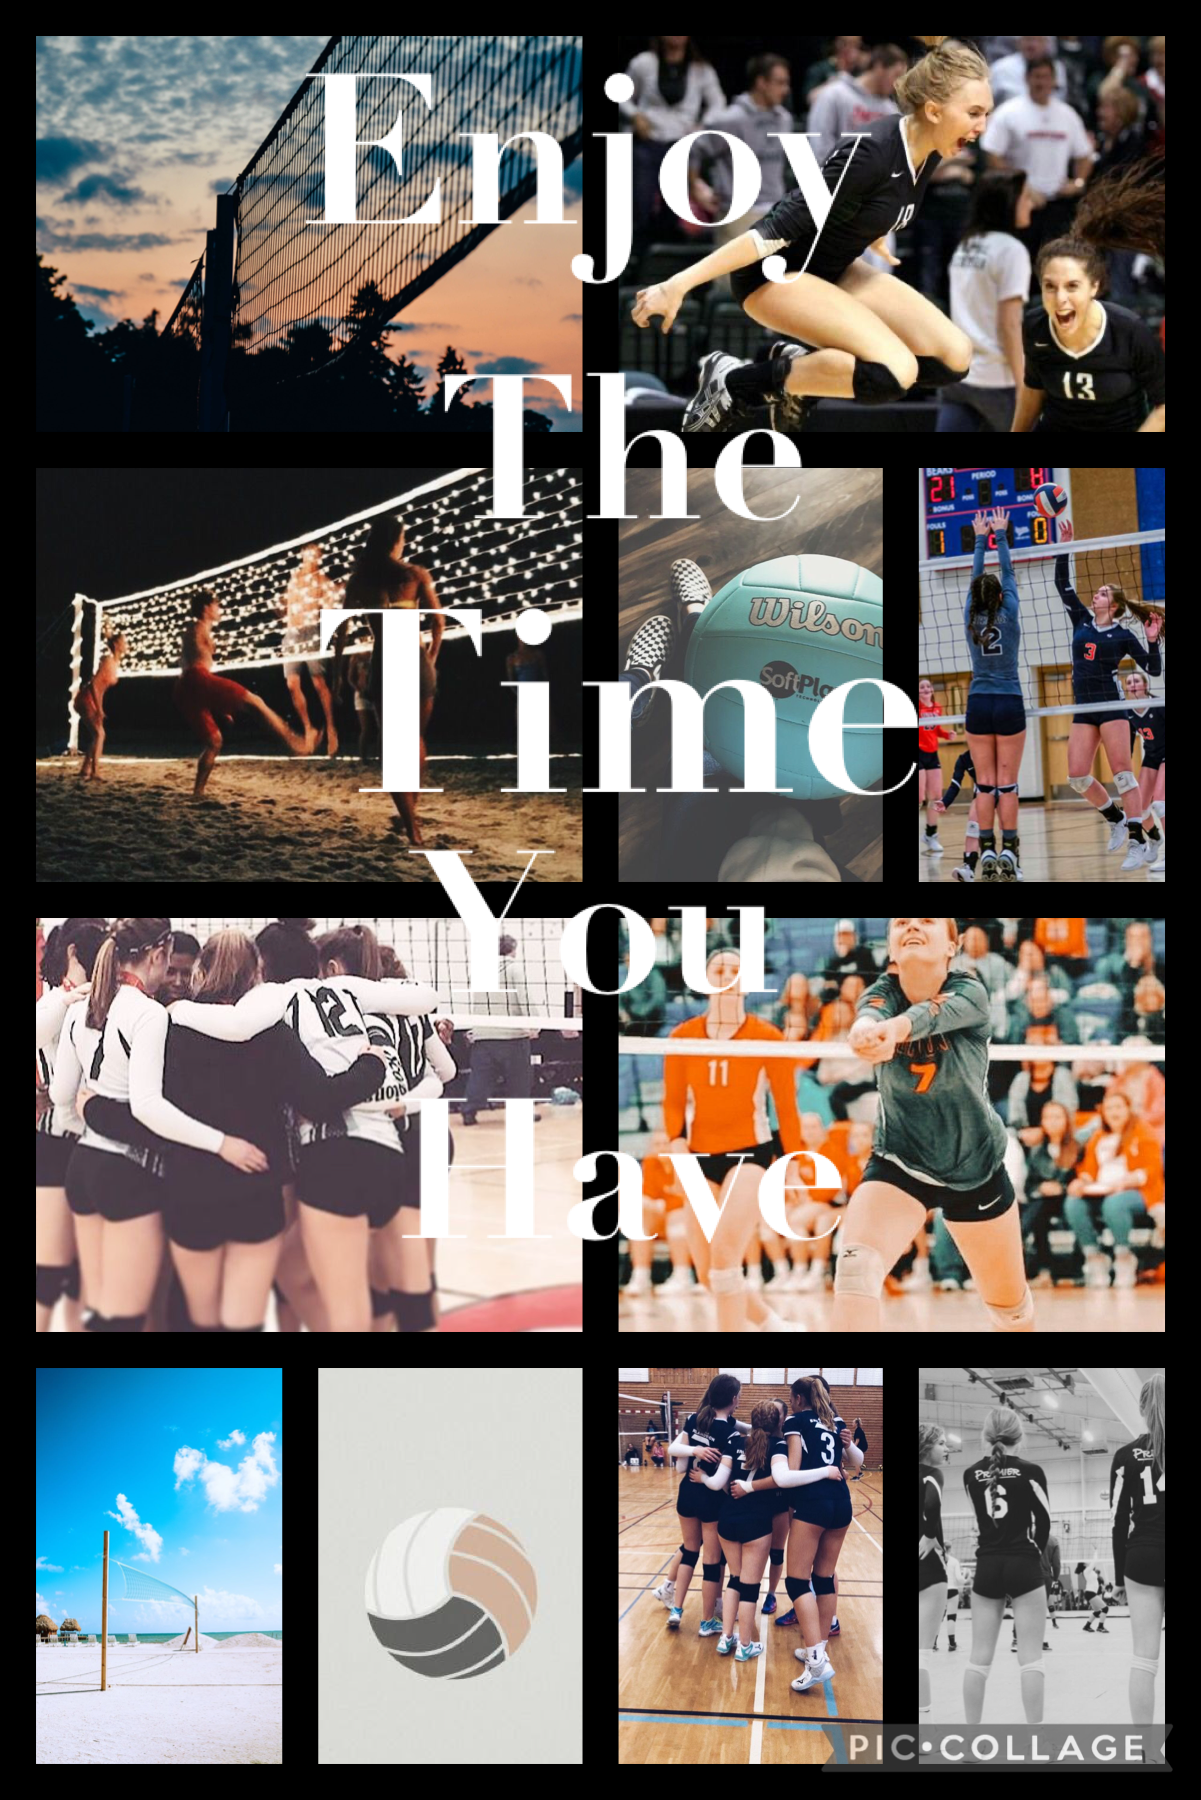 This one wasn’t my best! But I just wanted to share that you don’t have much time and make the best effort u can if u play a sport my favorite sport is volleyball and I’m so grateful I can play it! 